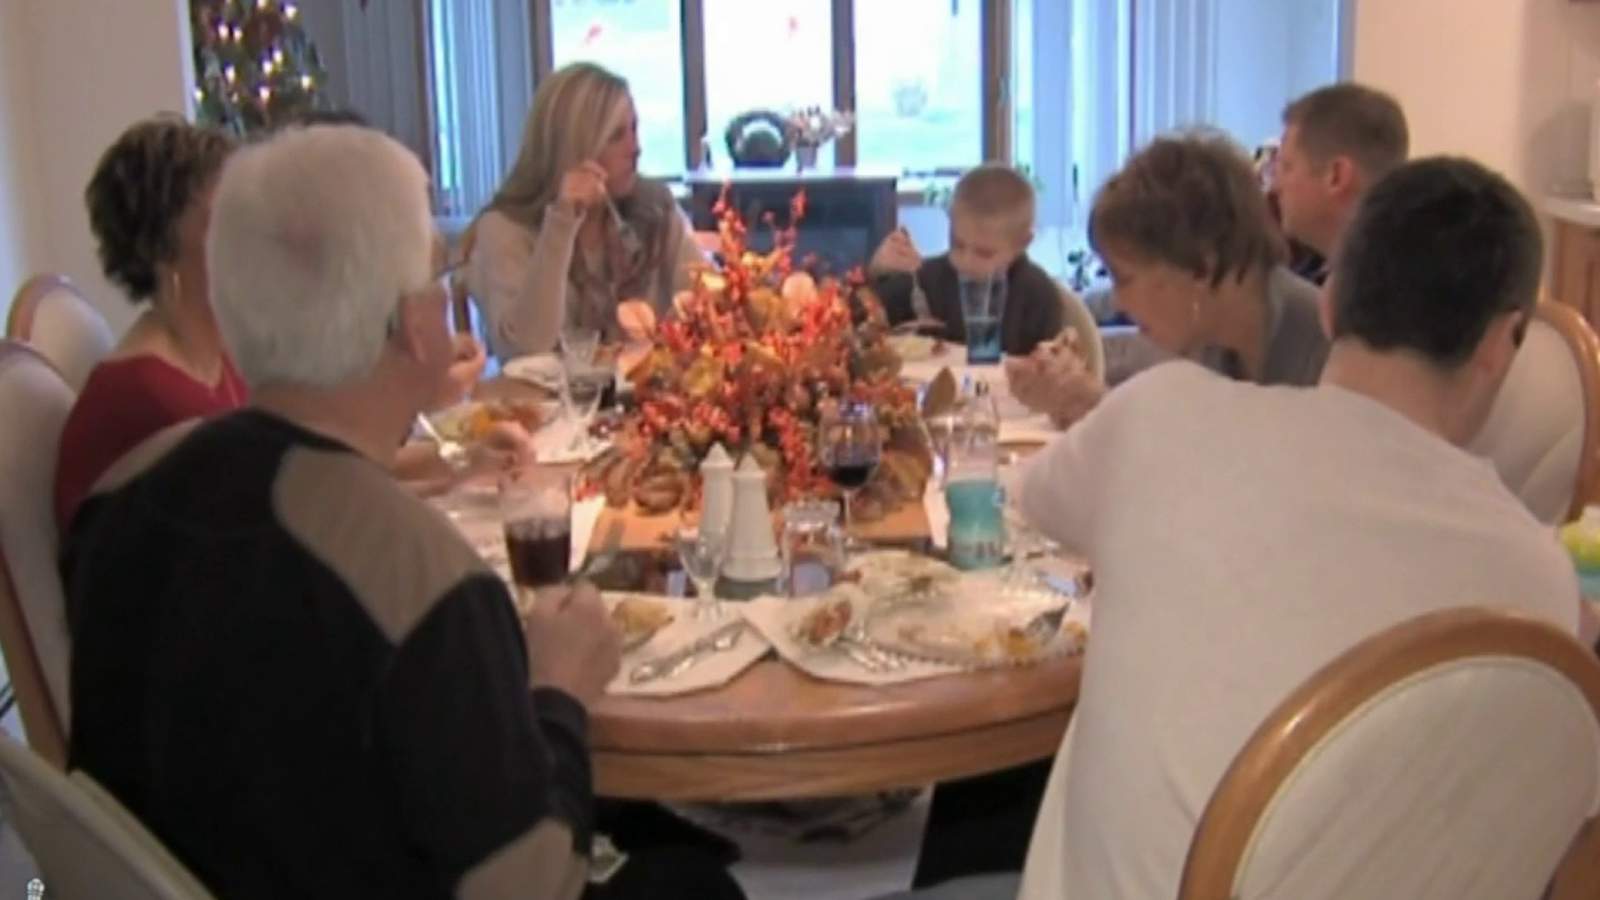 CDC ranks traditional Thanksgiving activities from high to low risk during COVID-19 pandemic